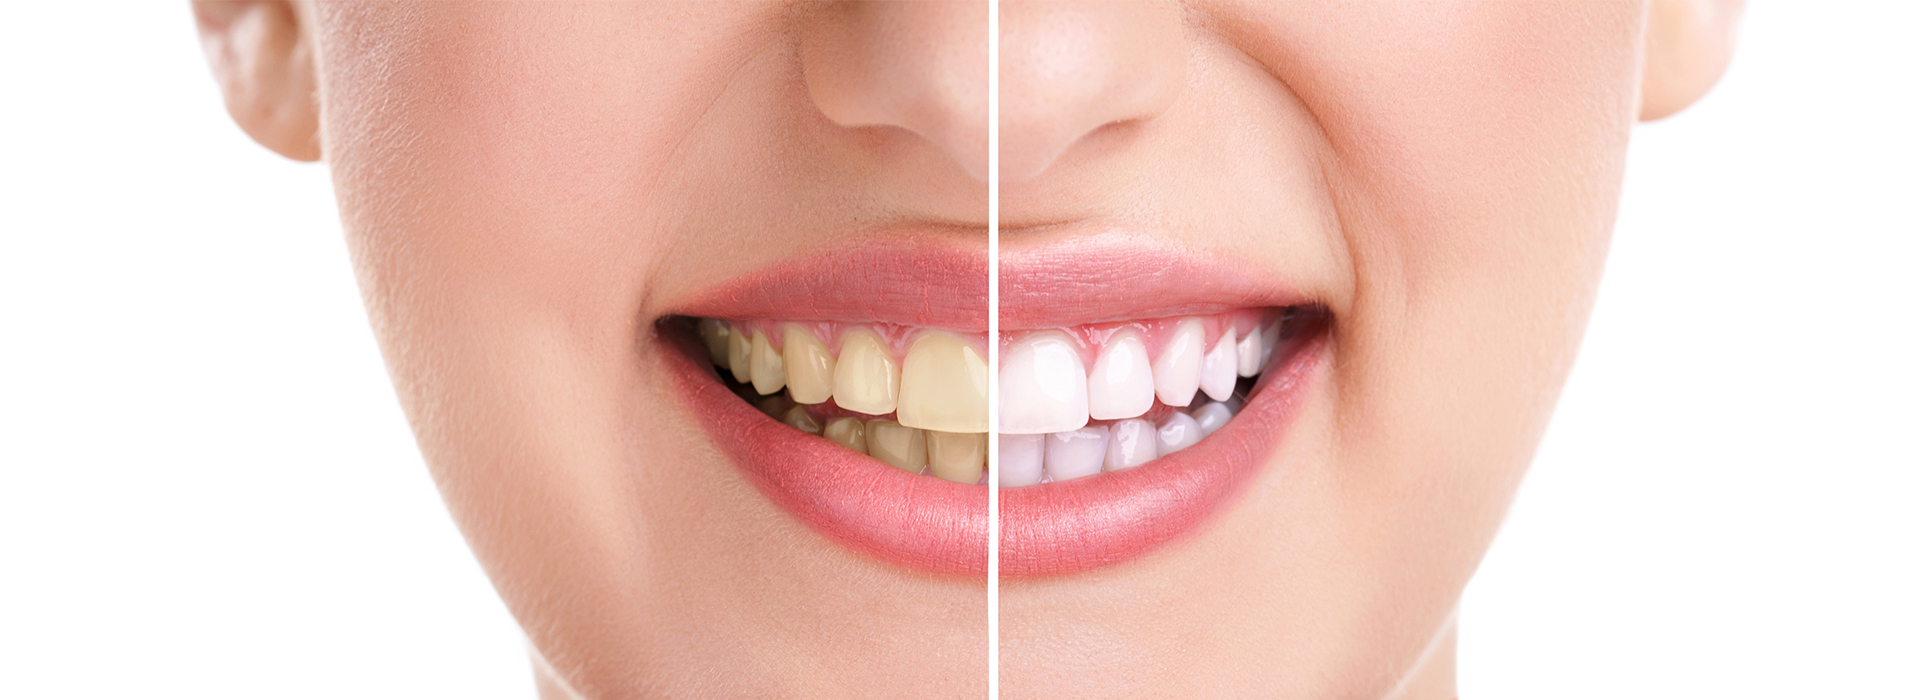 The image is a before and after comparison of a person s teeth, showcasing the result of dental treatment.